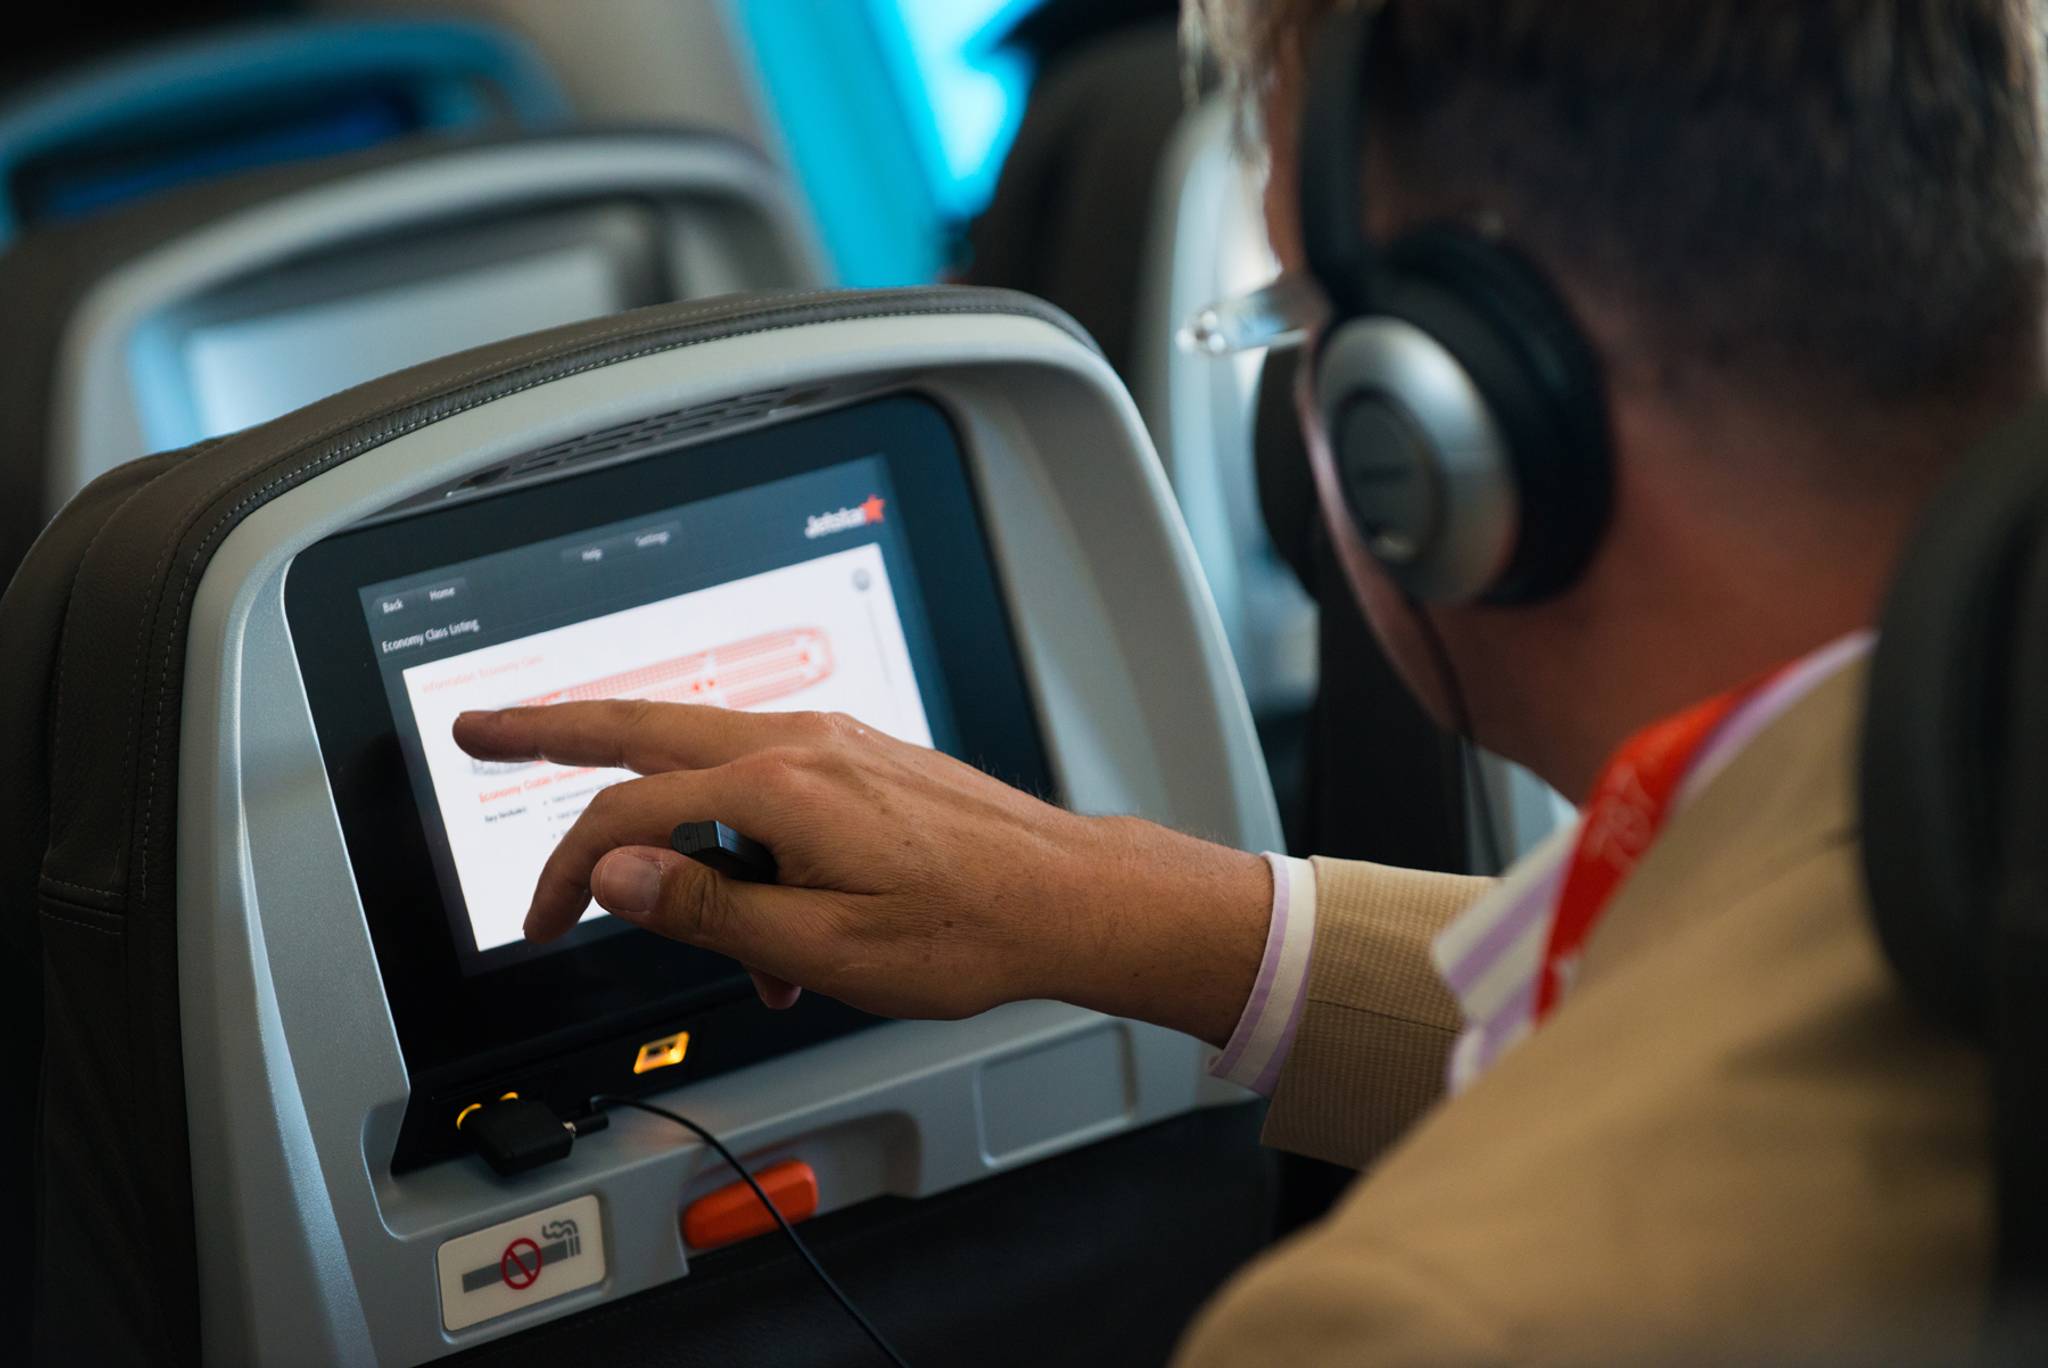 American Airlines is scrapping seat-back screens